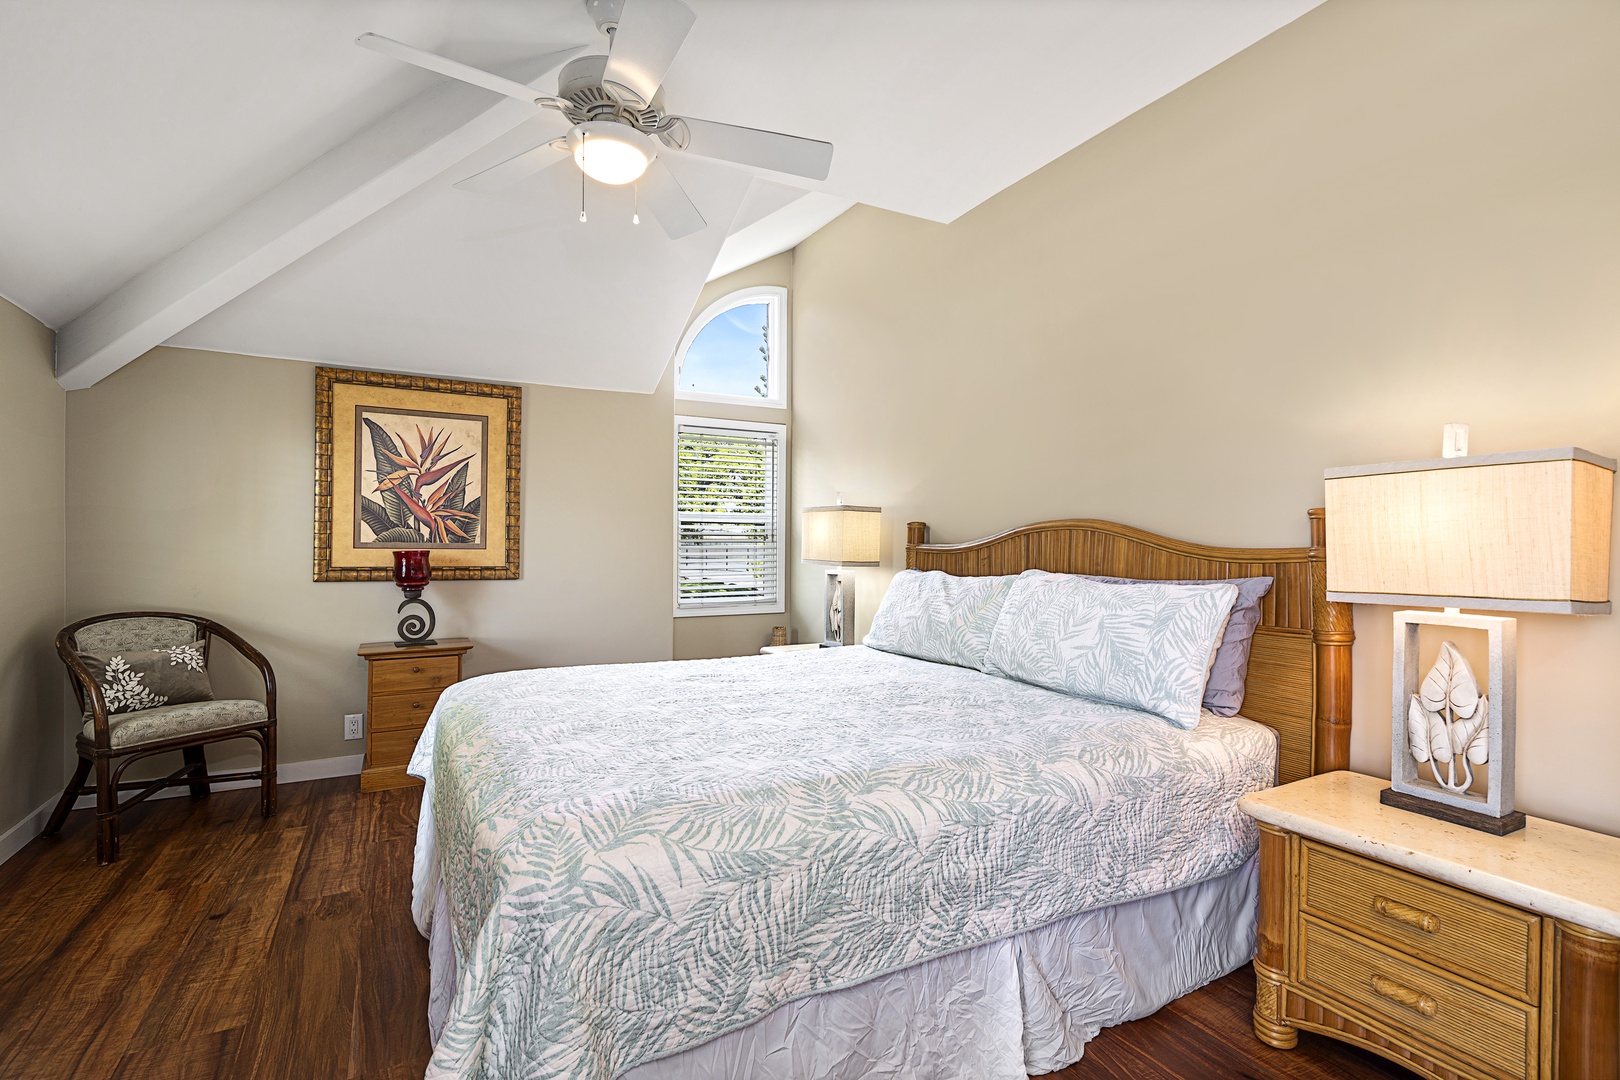 Kailua Kona Vacation Rentals, Kona Blue - Guest bedroom equipped with King bed, central A/C, and private balcony